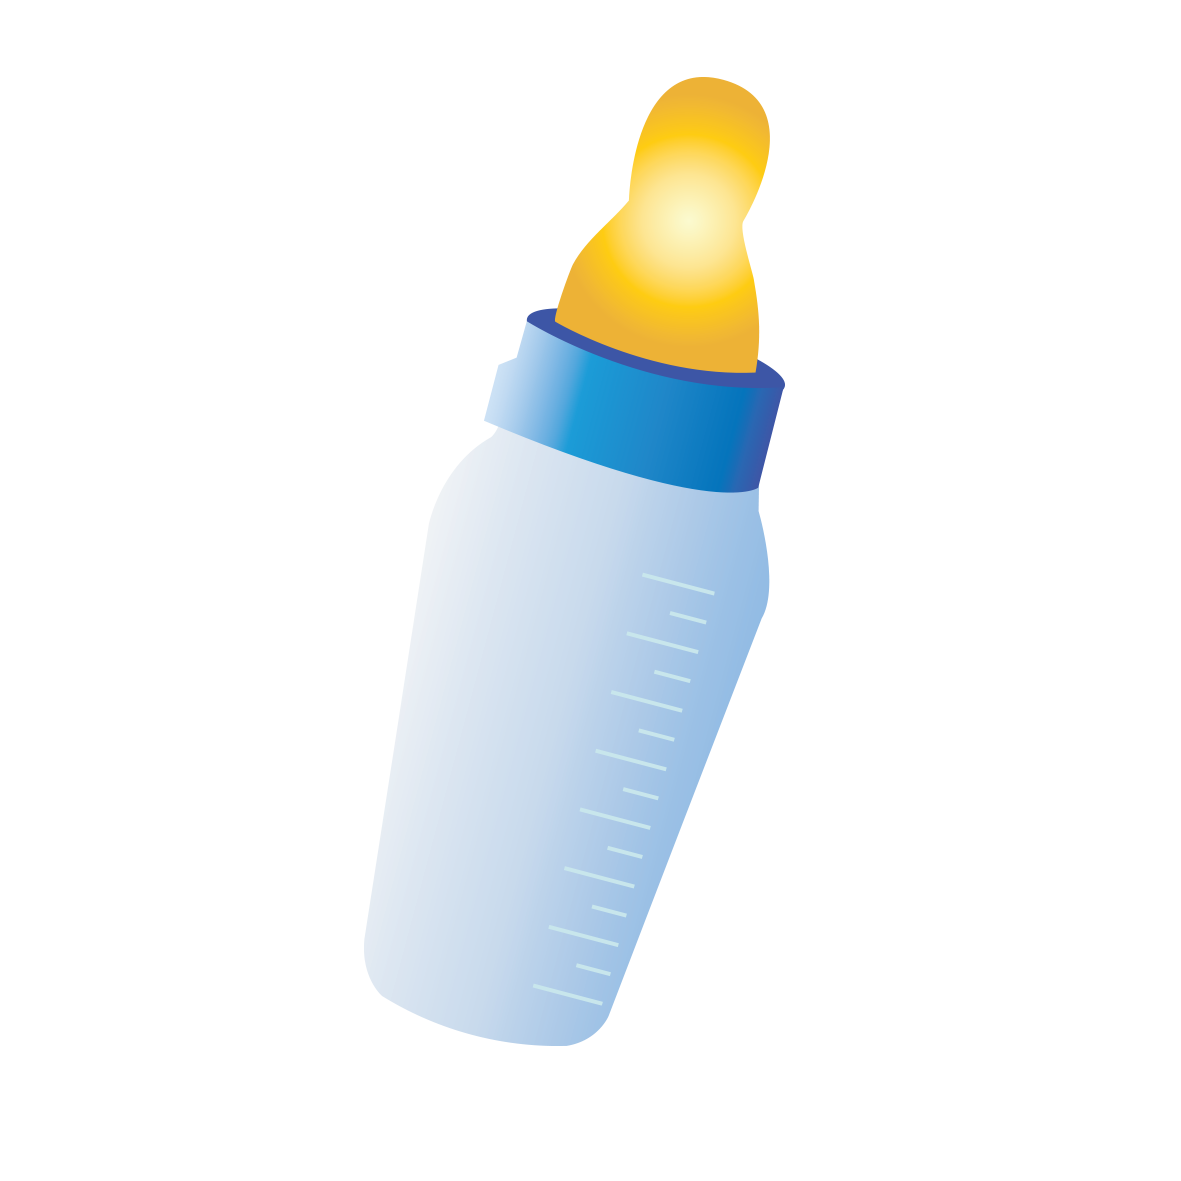 Baby Bottle PNG Free Image